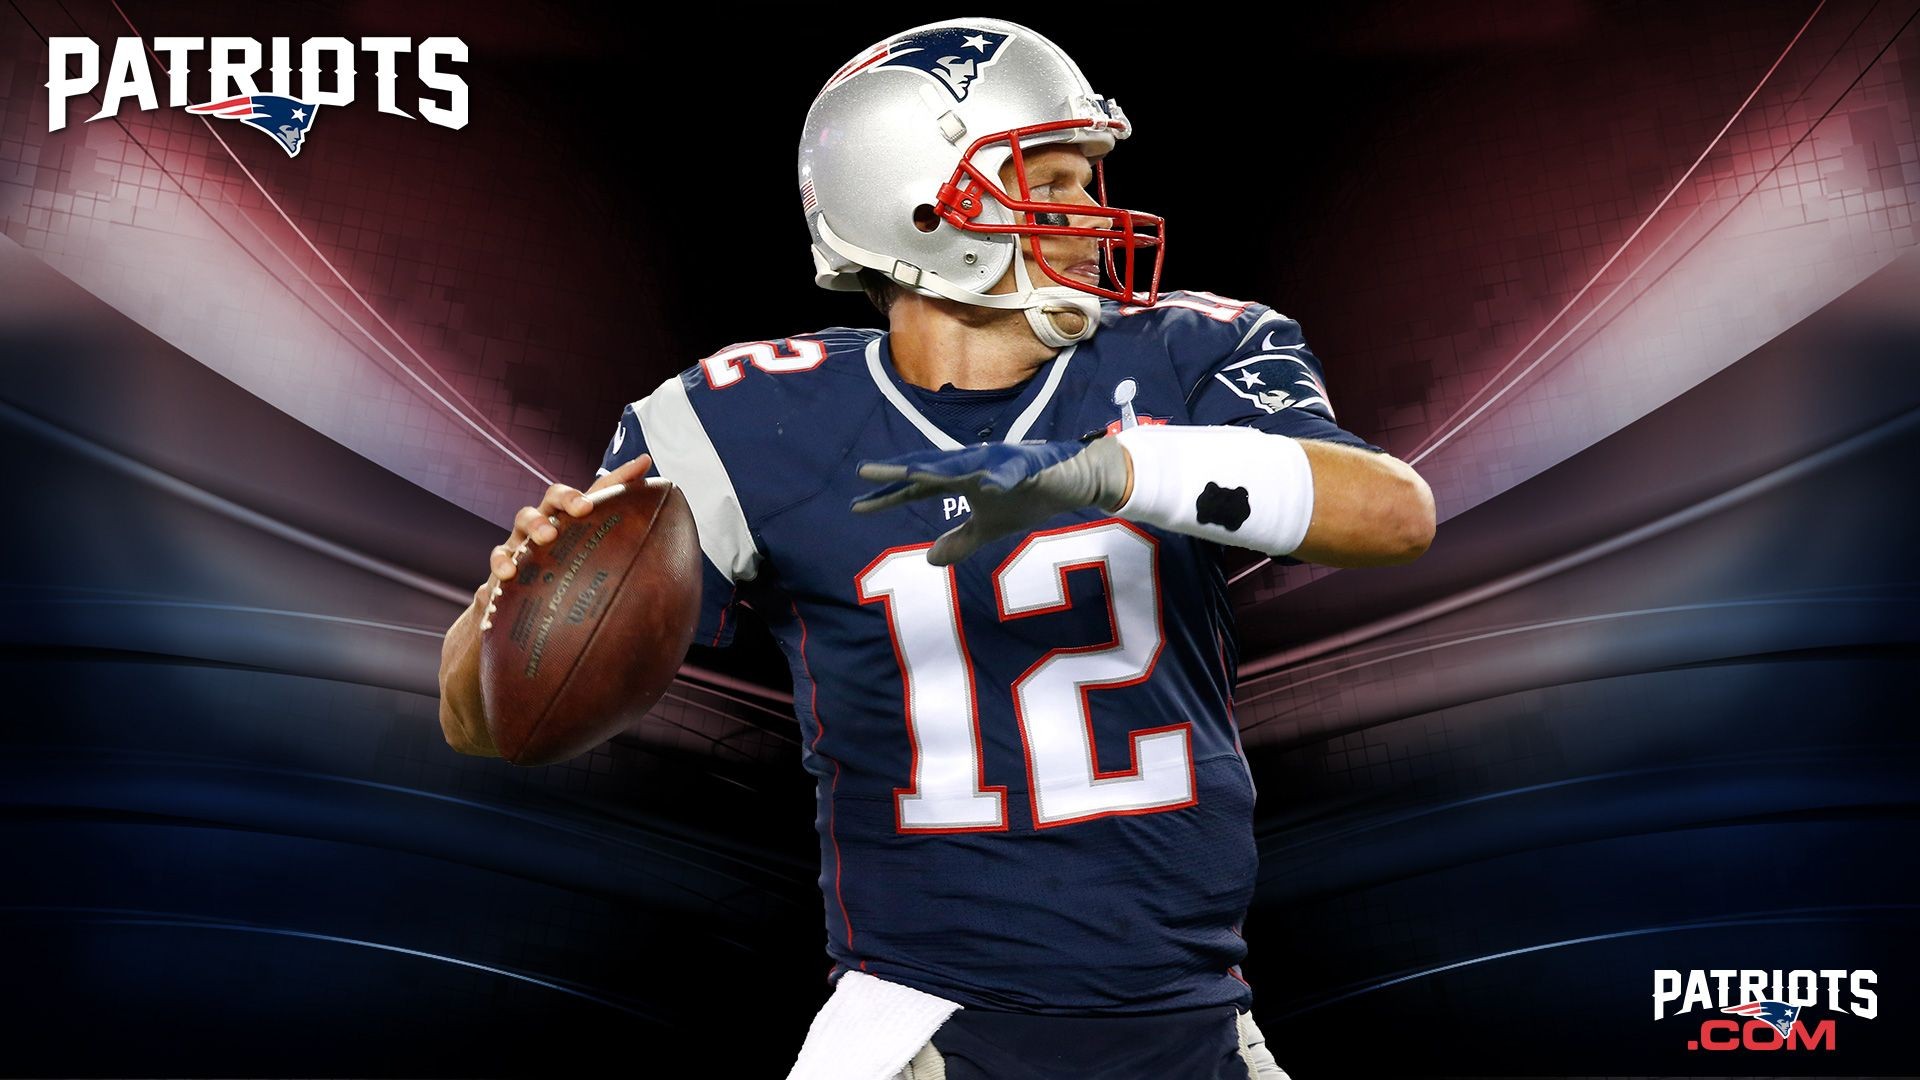 Wallpaper Tom Brady Patriots HD With Resolution 1920X1080 pixel. You can make this wallpaper for your Desktop Computer Backgrounds, Mac Wallpapers, Android Lock screen or iPhone Screensavers